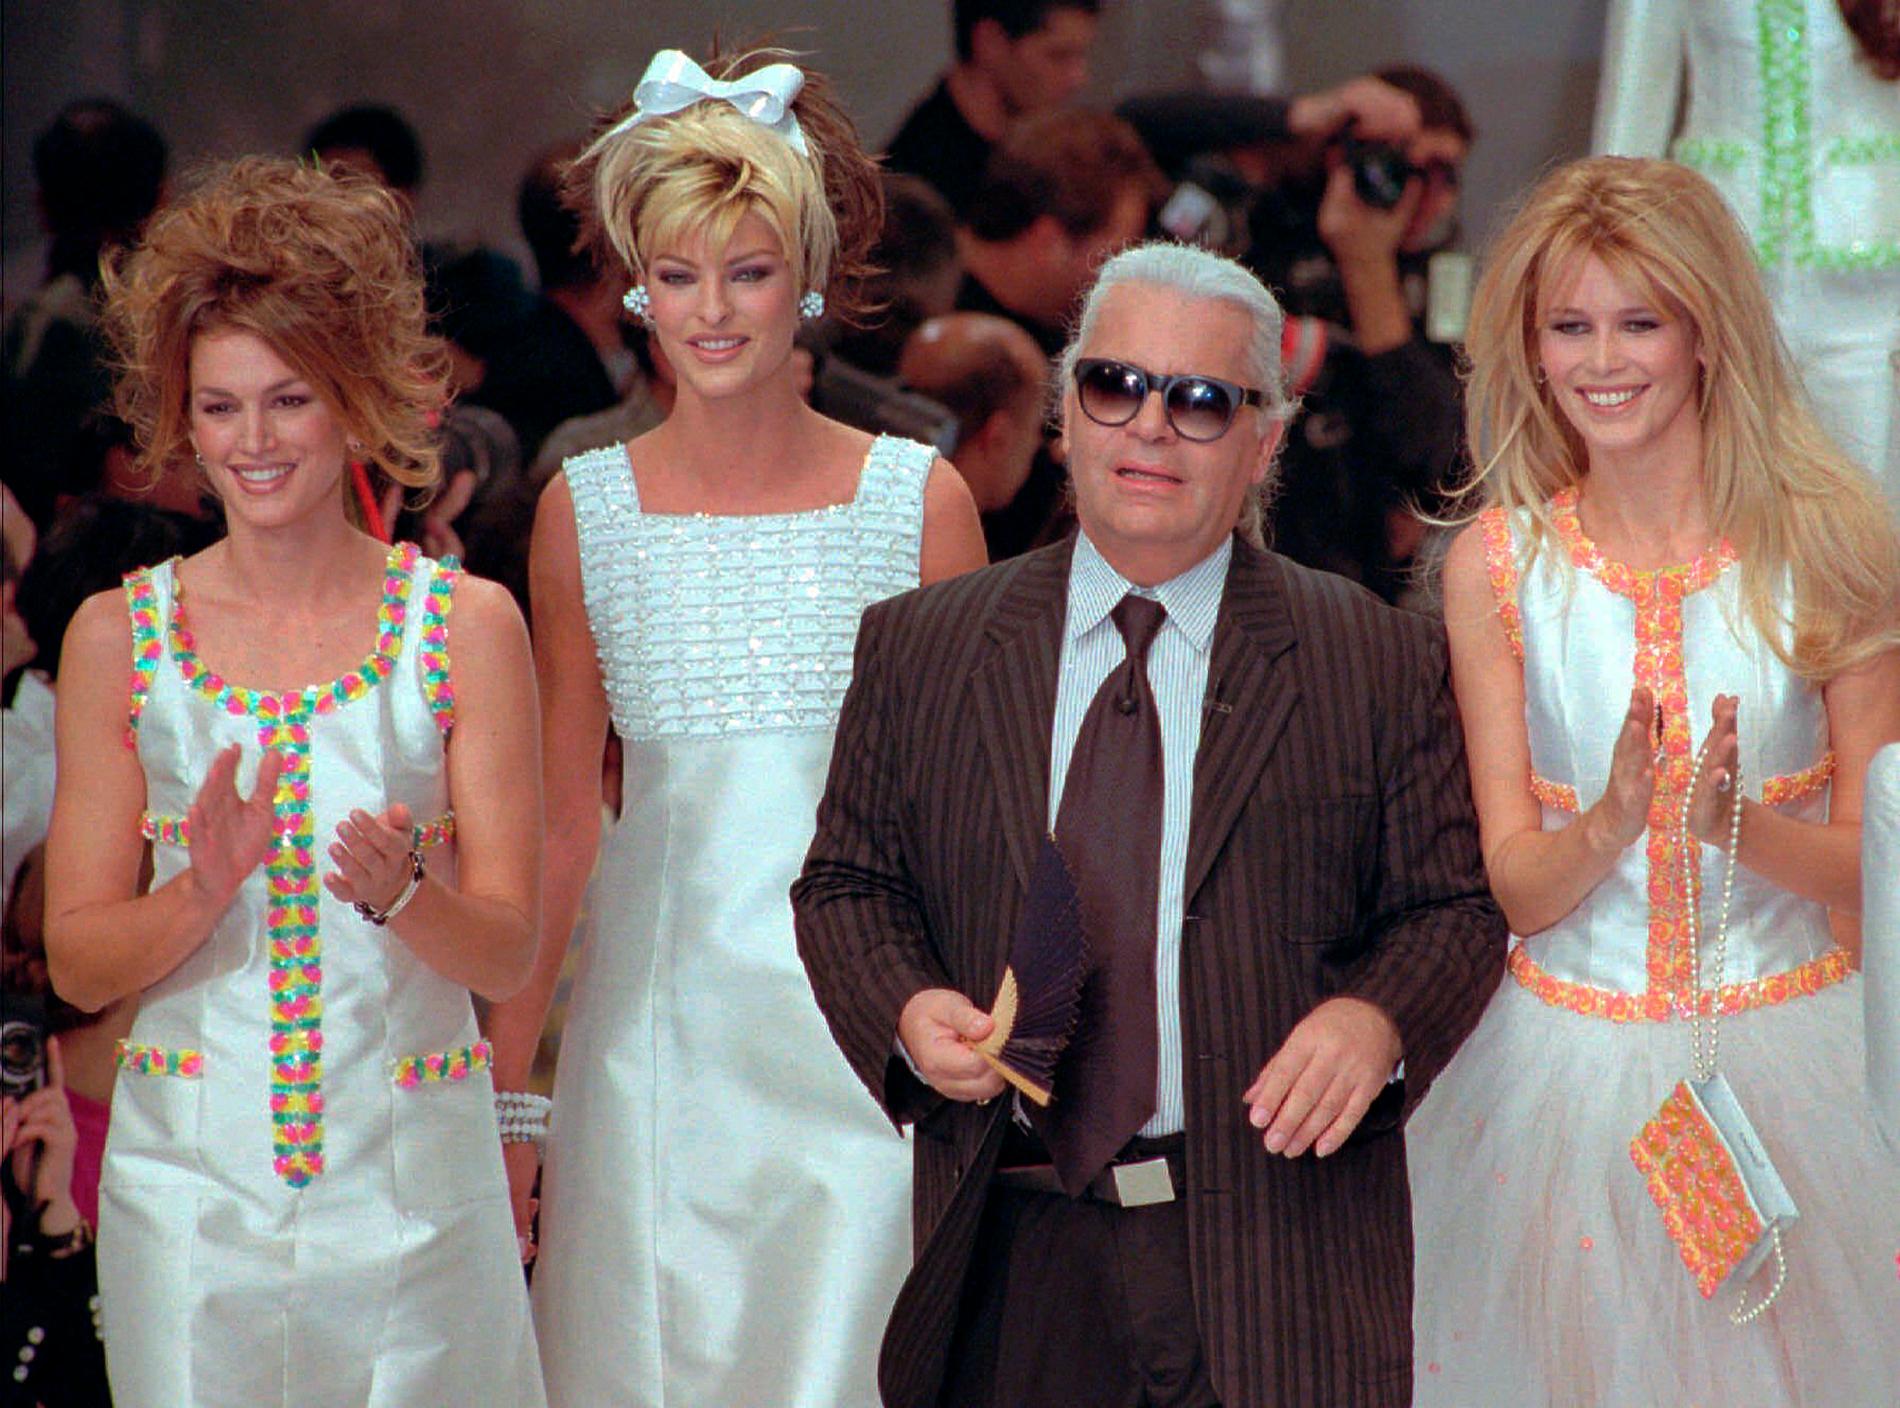 1996: The late Karl Lagerfeld flanked by some former supermodels Cindy Crawford, Linda Evangelista and Claudia Schiffer in New York.